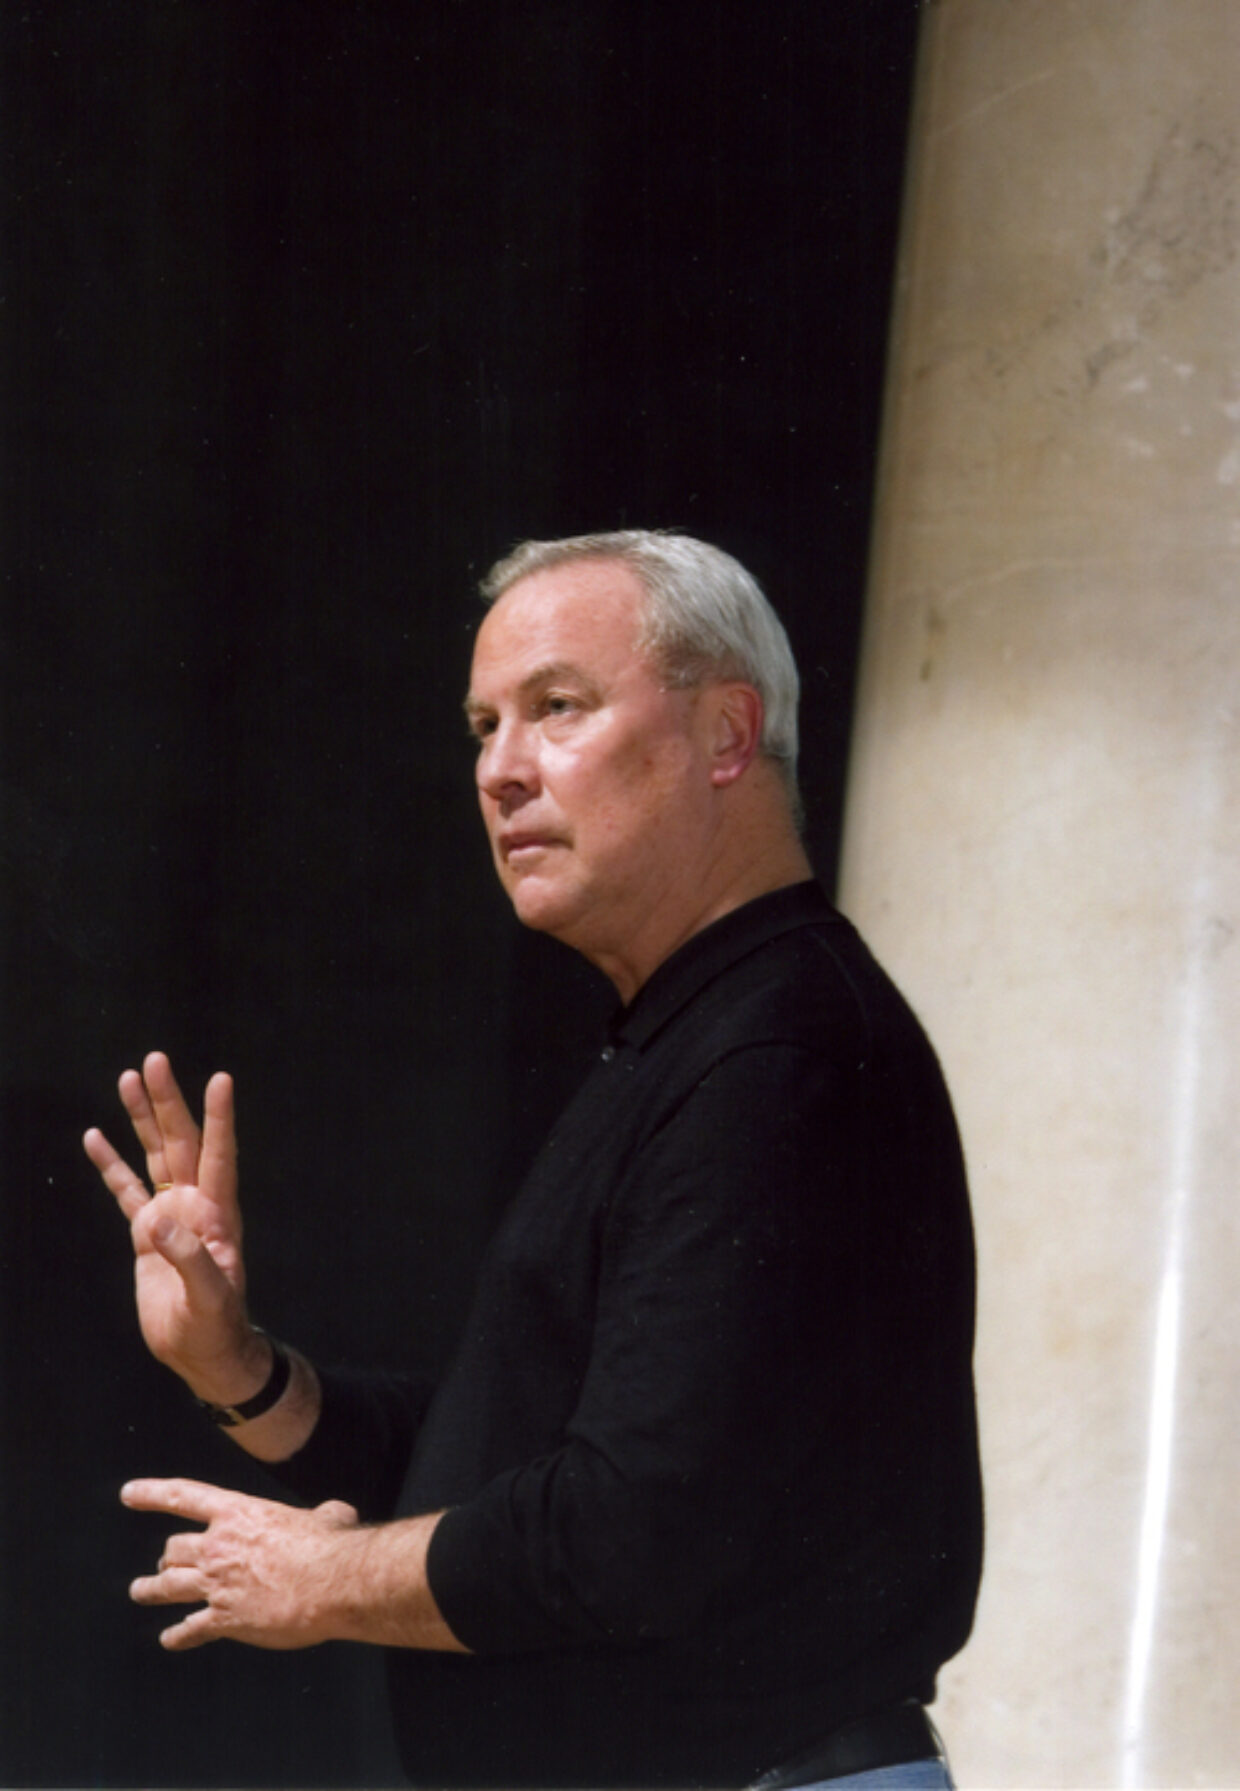 Artist and Theater Director Robert Wilson on Why He Considers All of His Works ‘Operas’ | 3